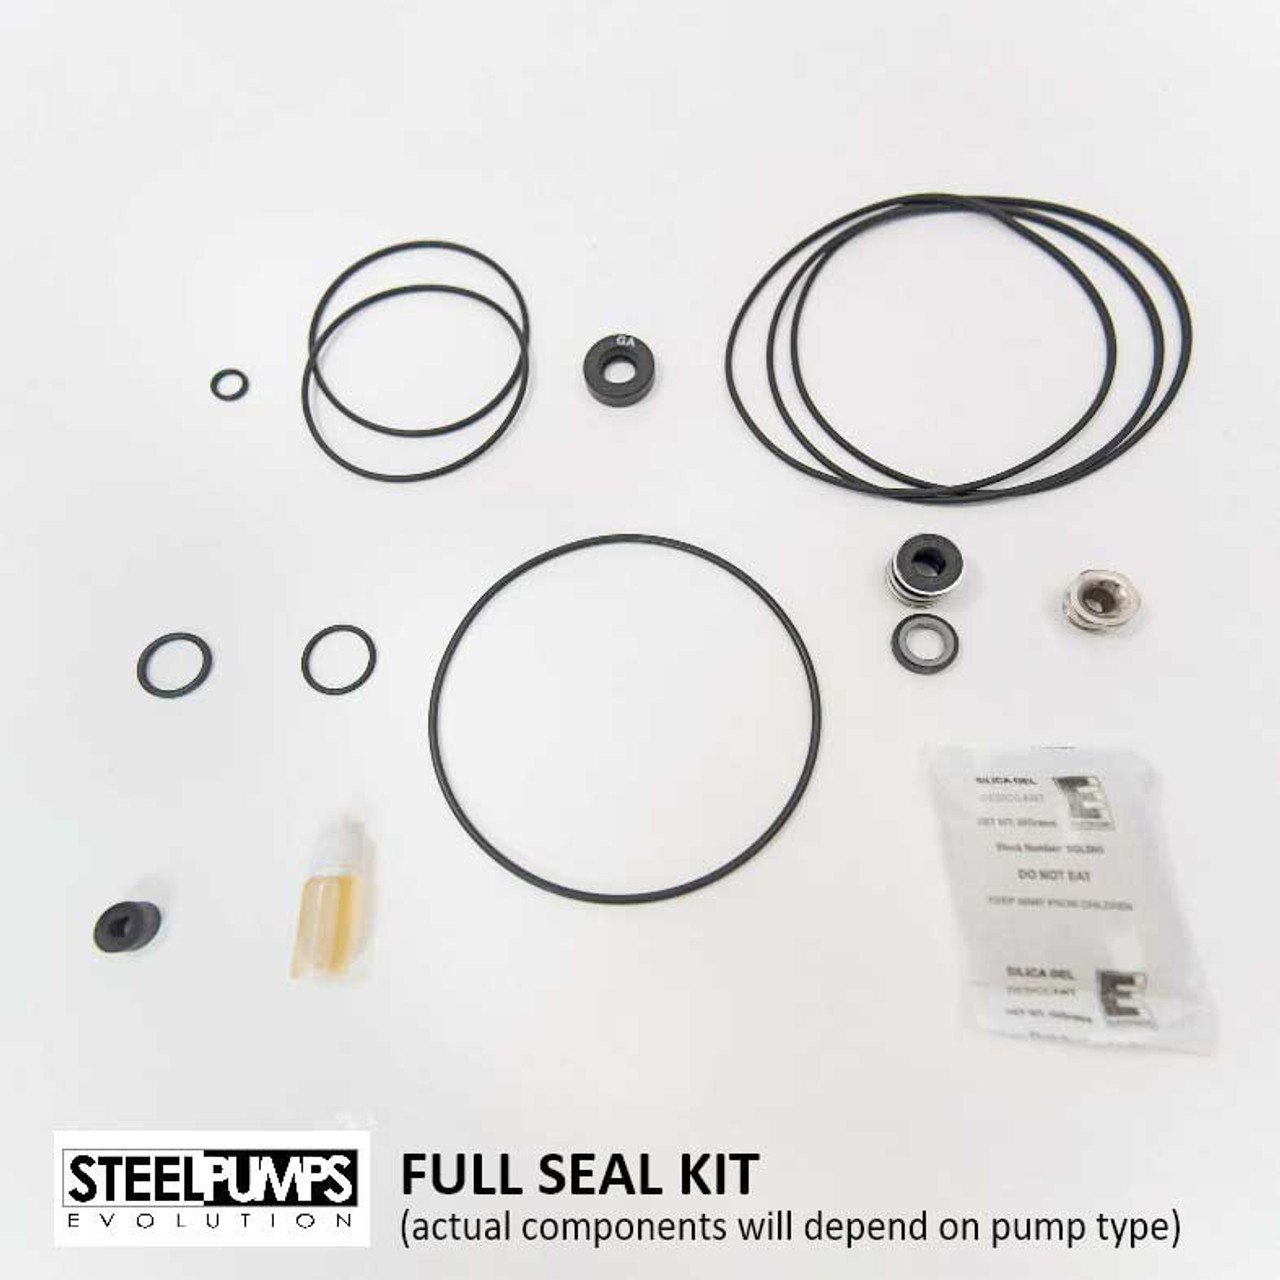 Full Seal Kit (actual components will depend on the model of SteelPump being serviced).